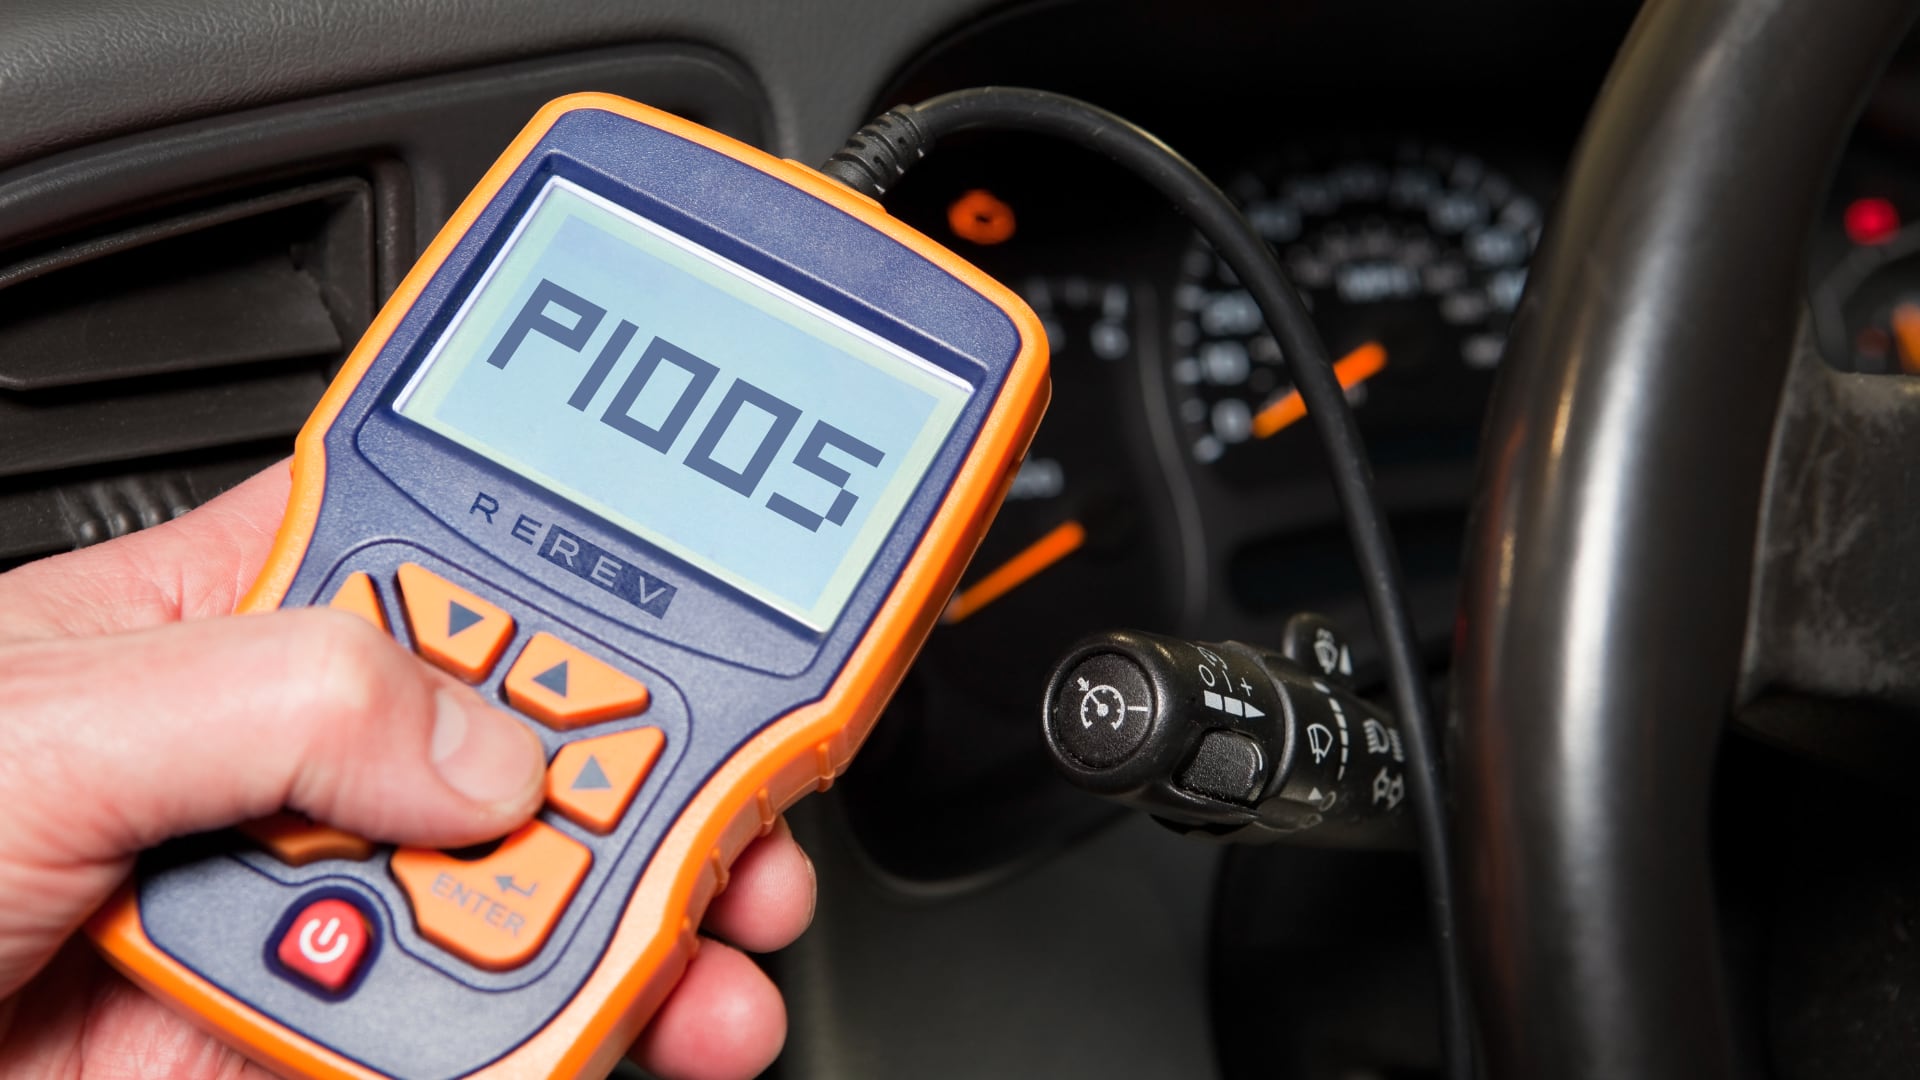 A person is holding a pdo tool while troubleshooting a P1005 code in a car.